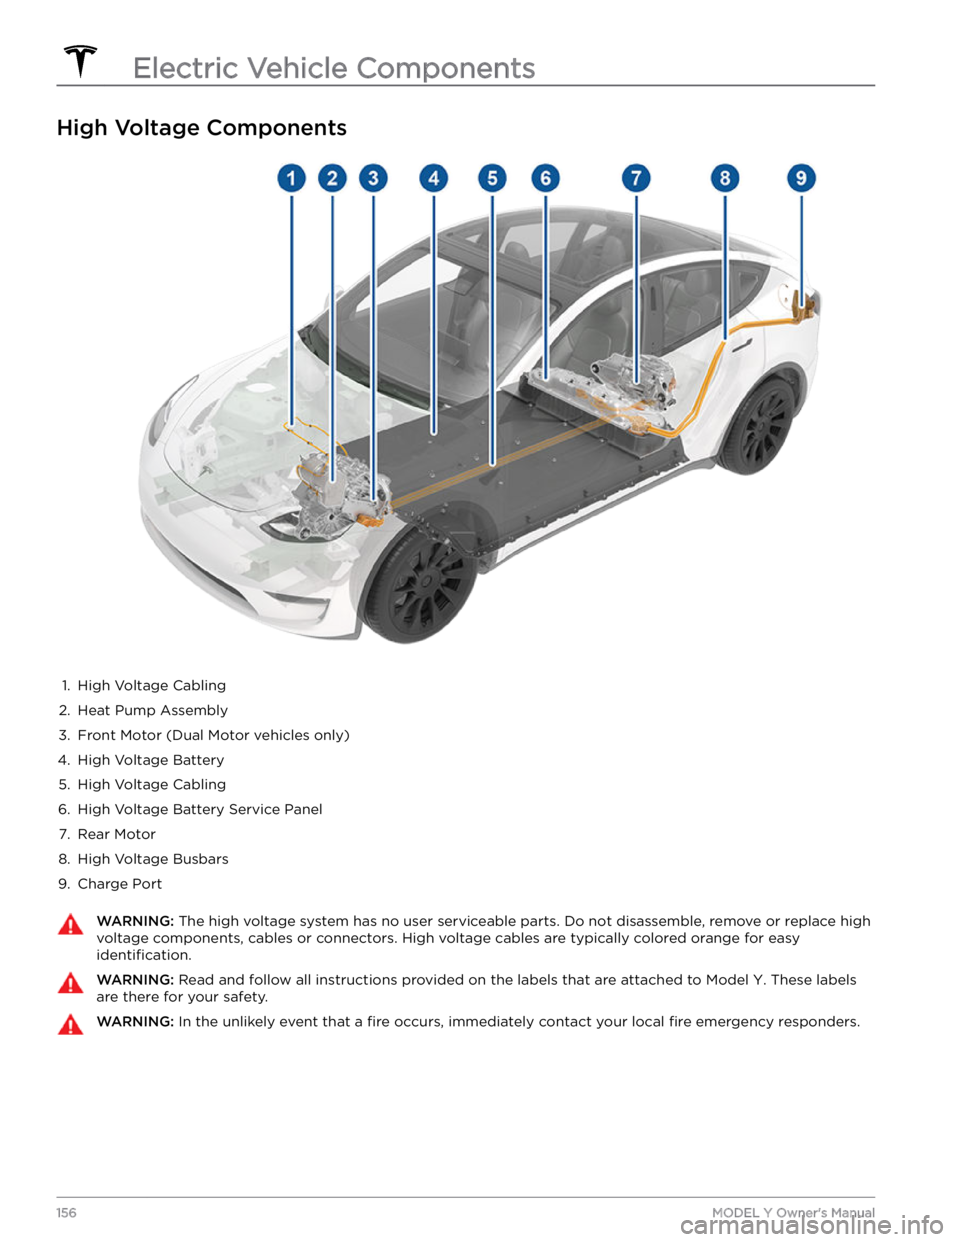 TESLA MODEL Y 2022  Owner´s Manual High Voltage Components
1. 
High Voltage Cabling
2. 
Heat Pump Assembly
3. 
Front Motor (Dual Motor vehicles only)
4. 
High Voltage Battery
5. 
High Voltage Cabling
6. 
High Voltage Battery Service Pa